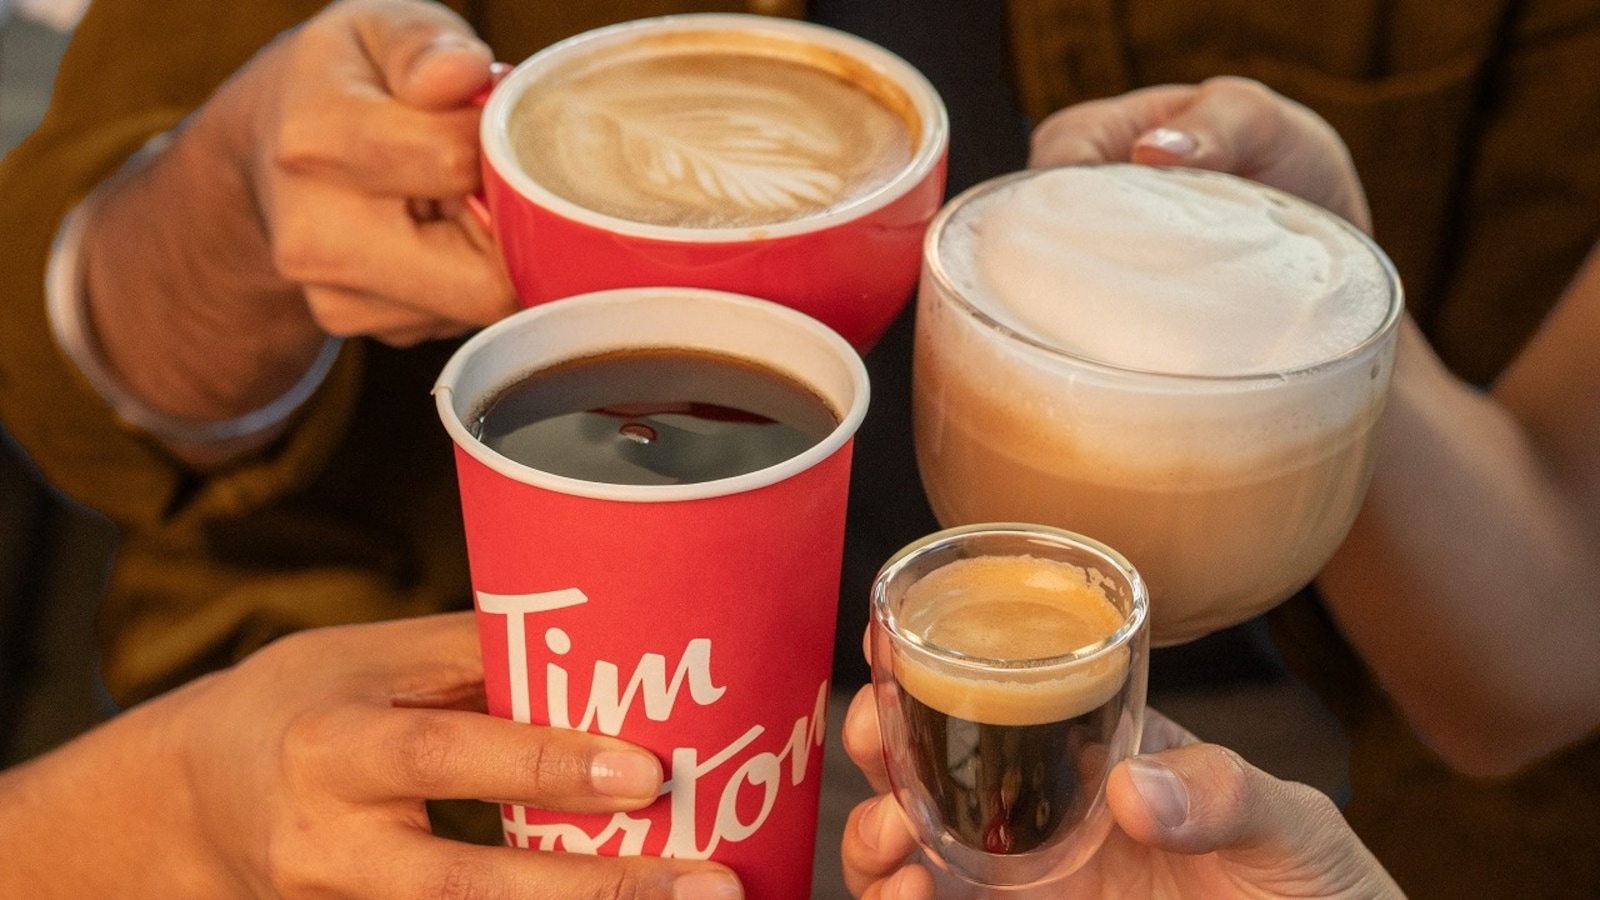 How a sip of Coca-Cola could cure all that ails Tim Hortons